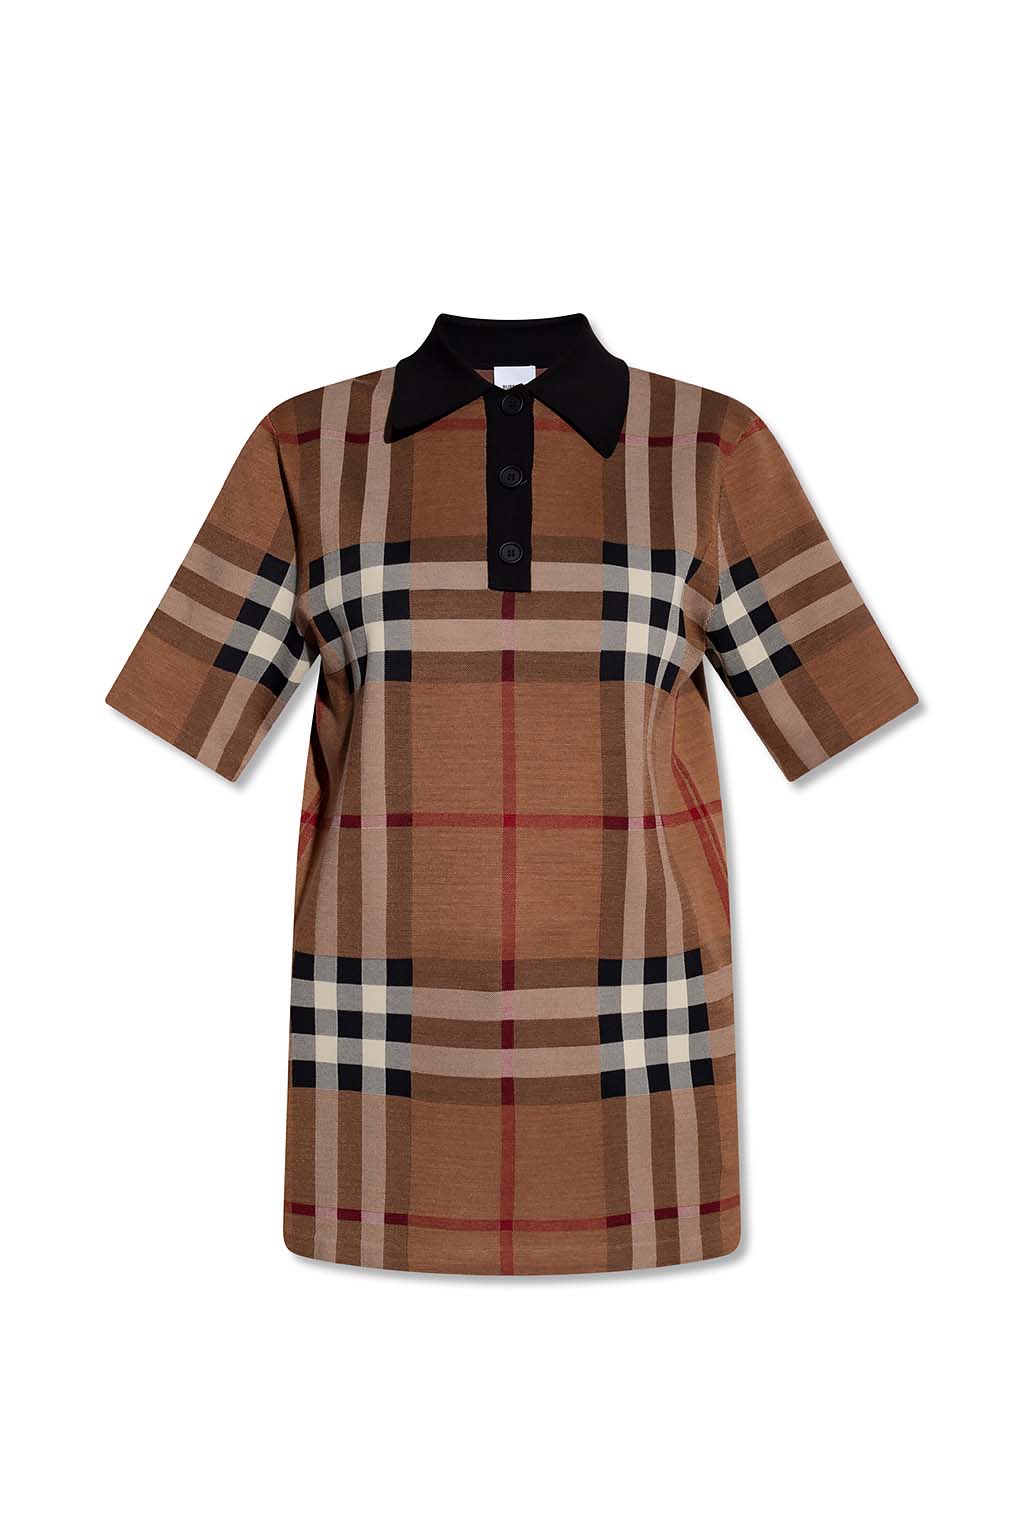 Burberry Emery Check Top in Brown